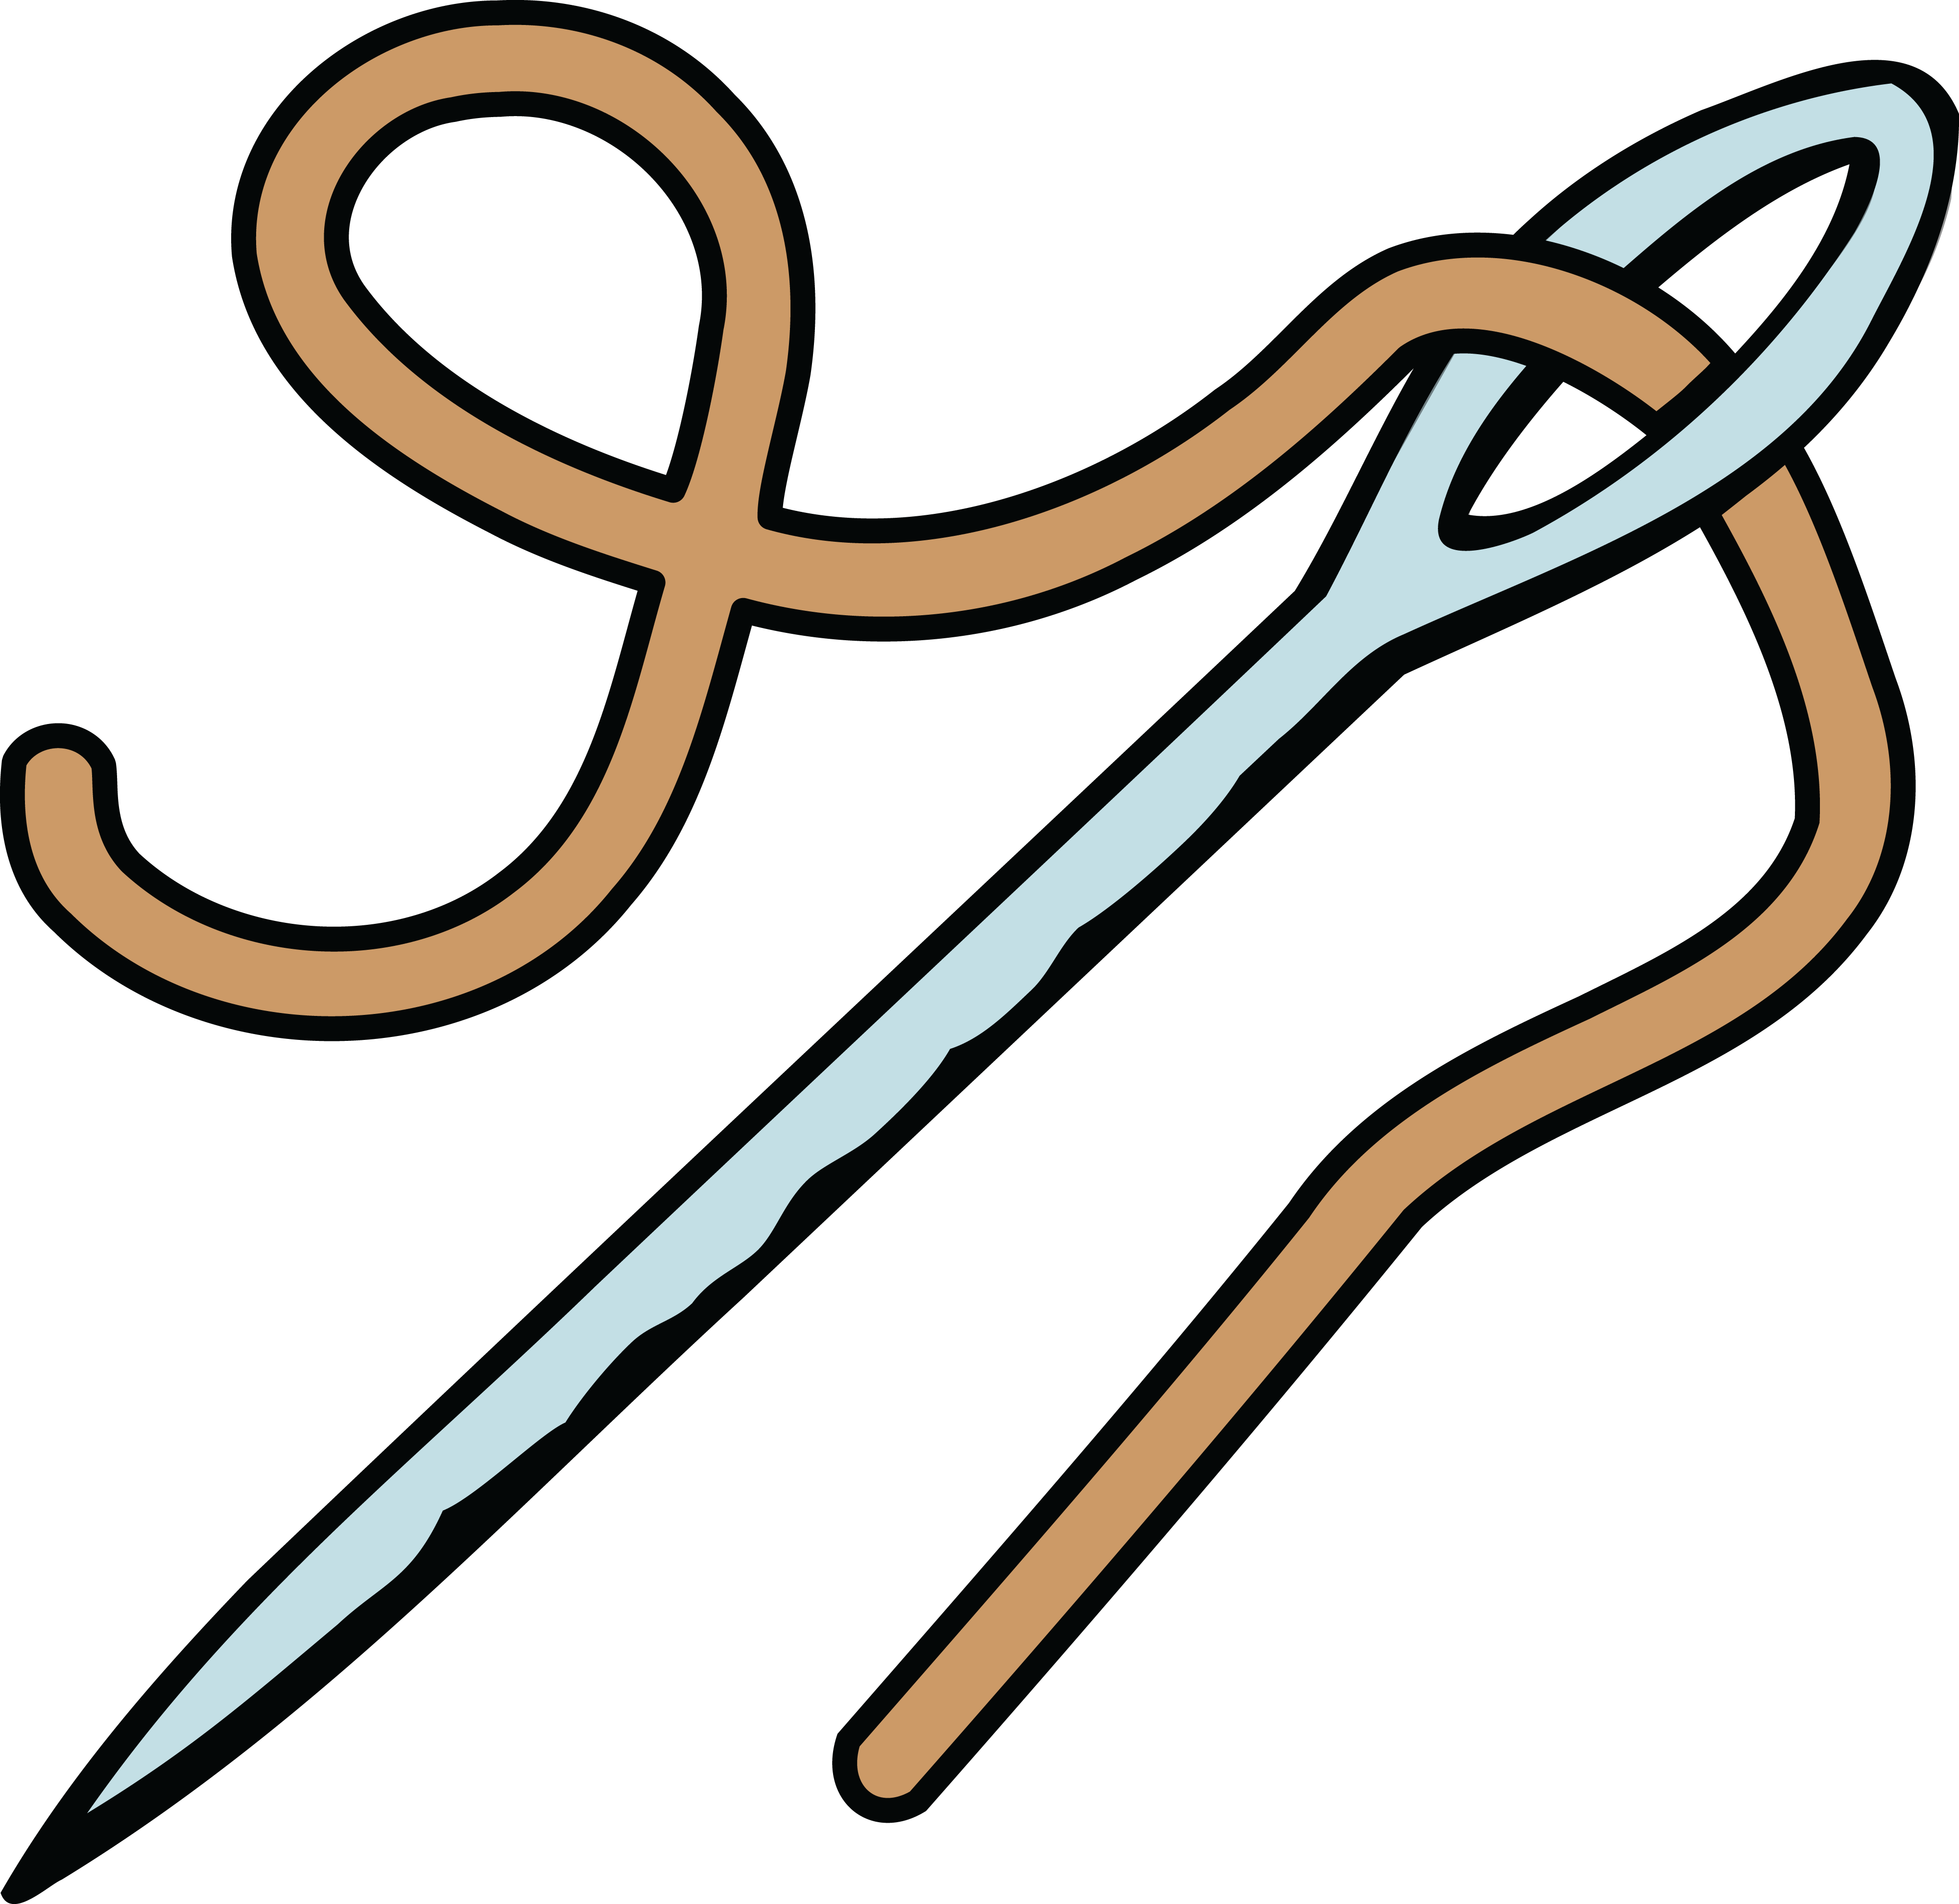 Free Clipart Of A needle and thread